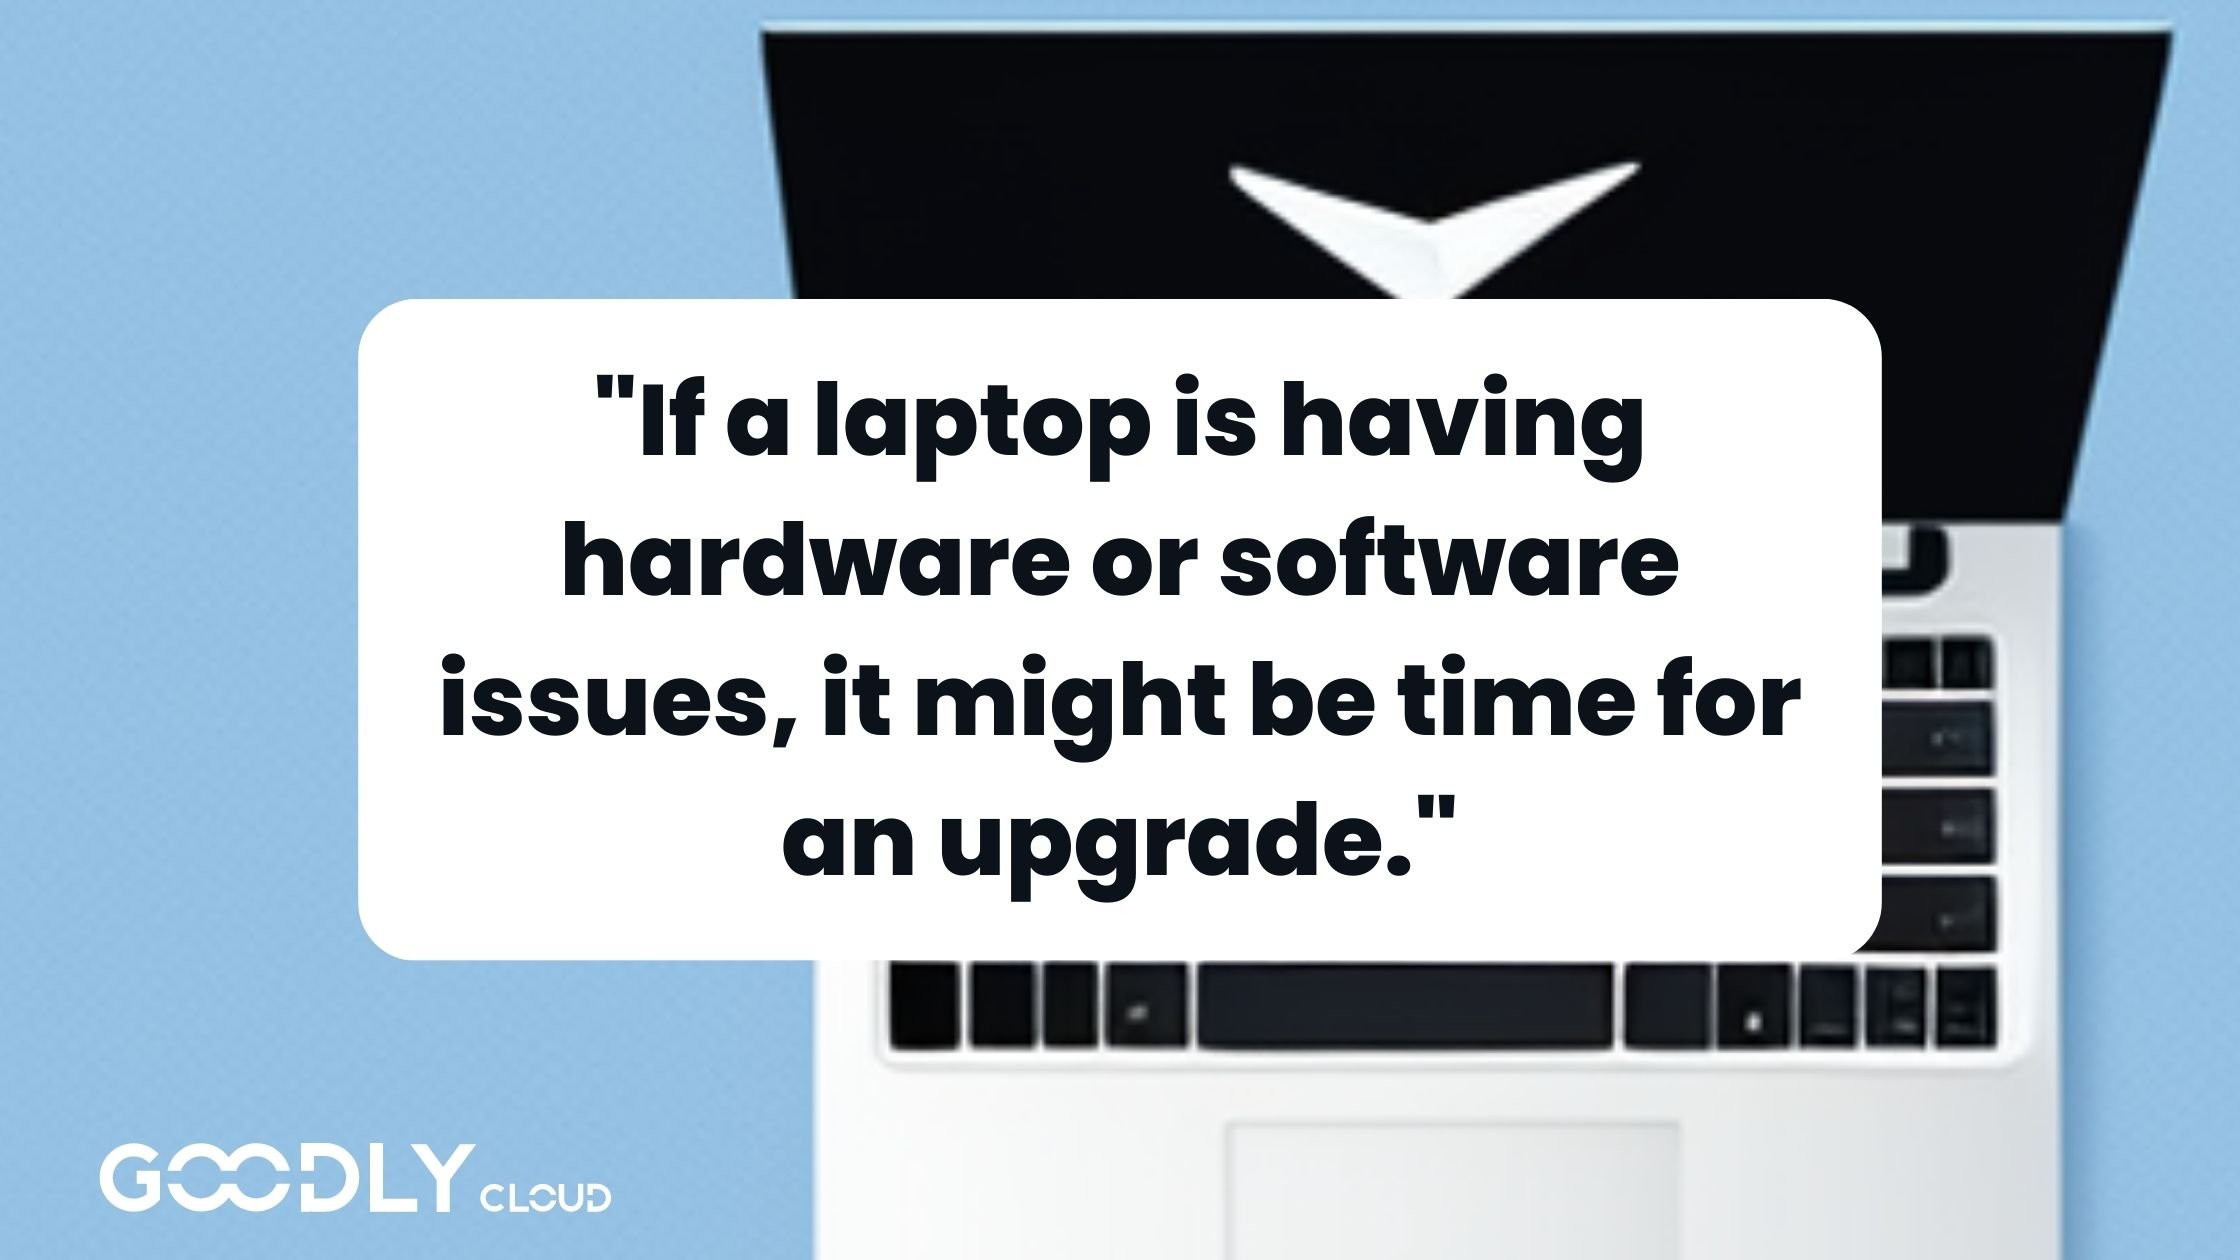 replace a laptop with hardware issues